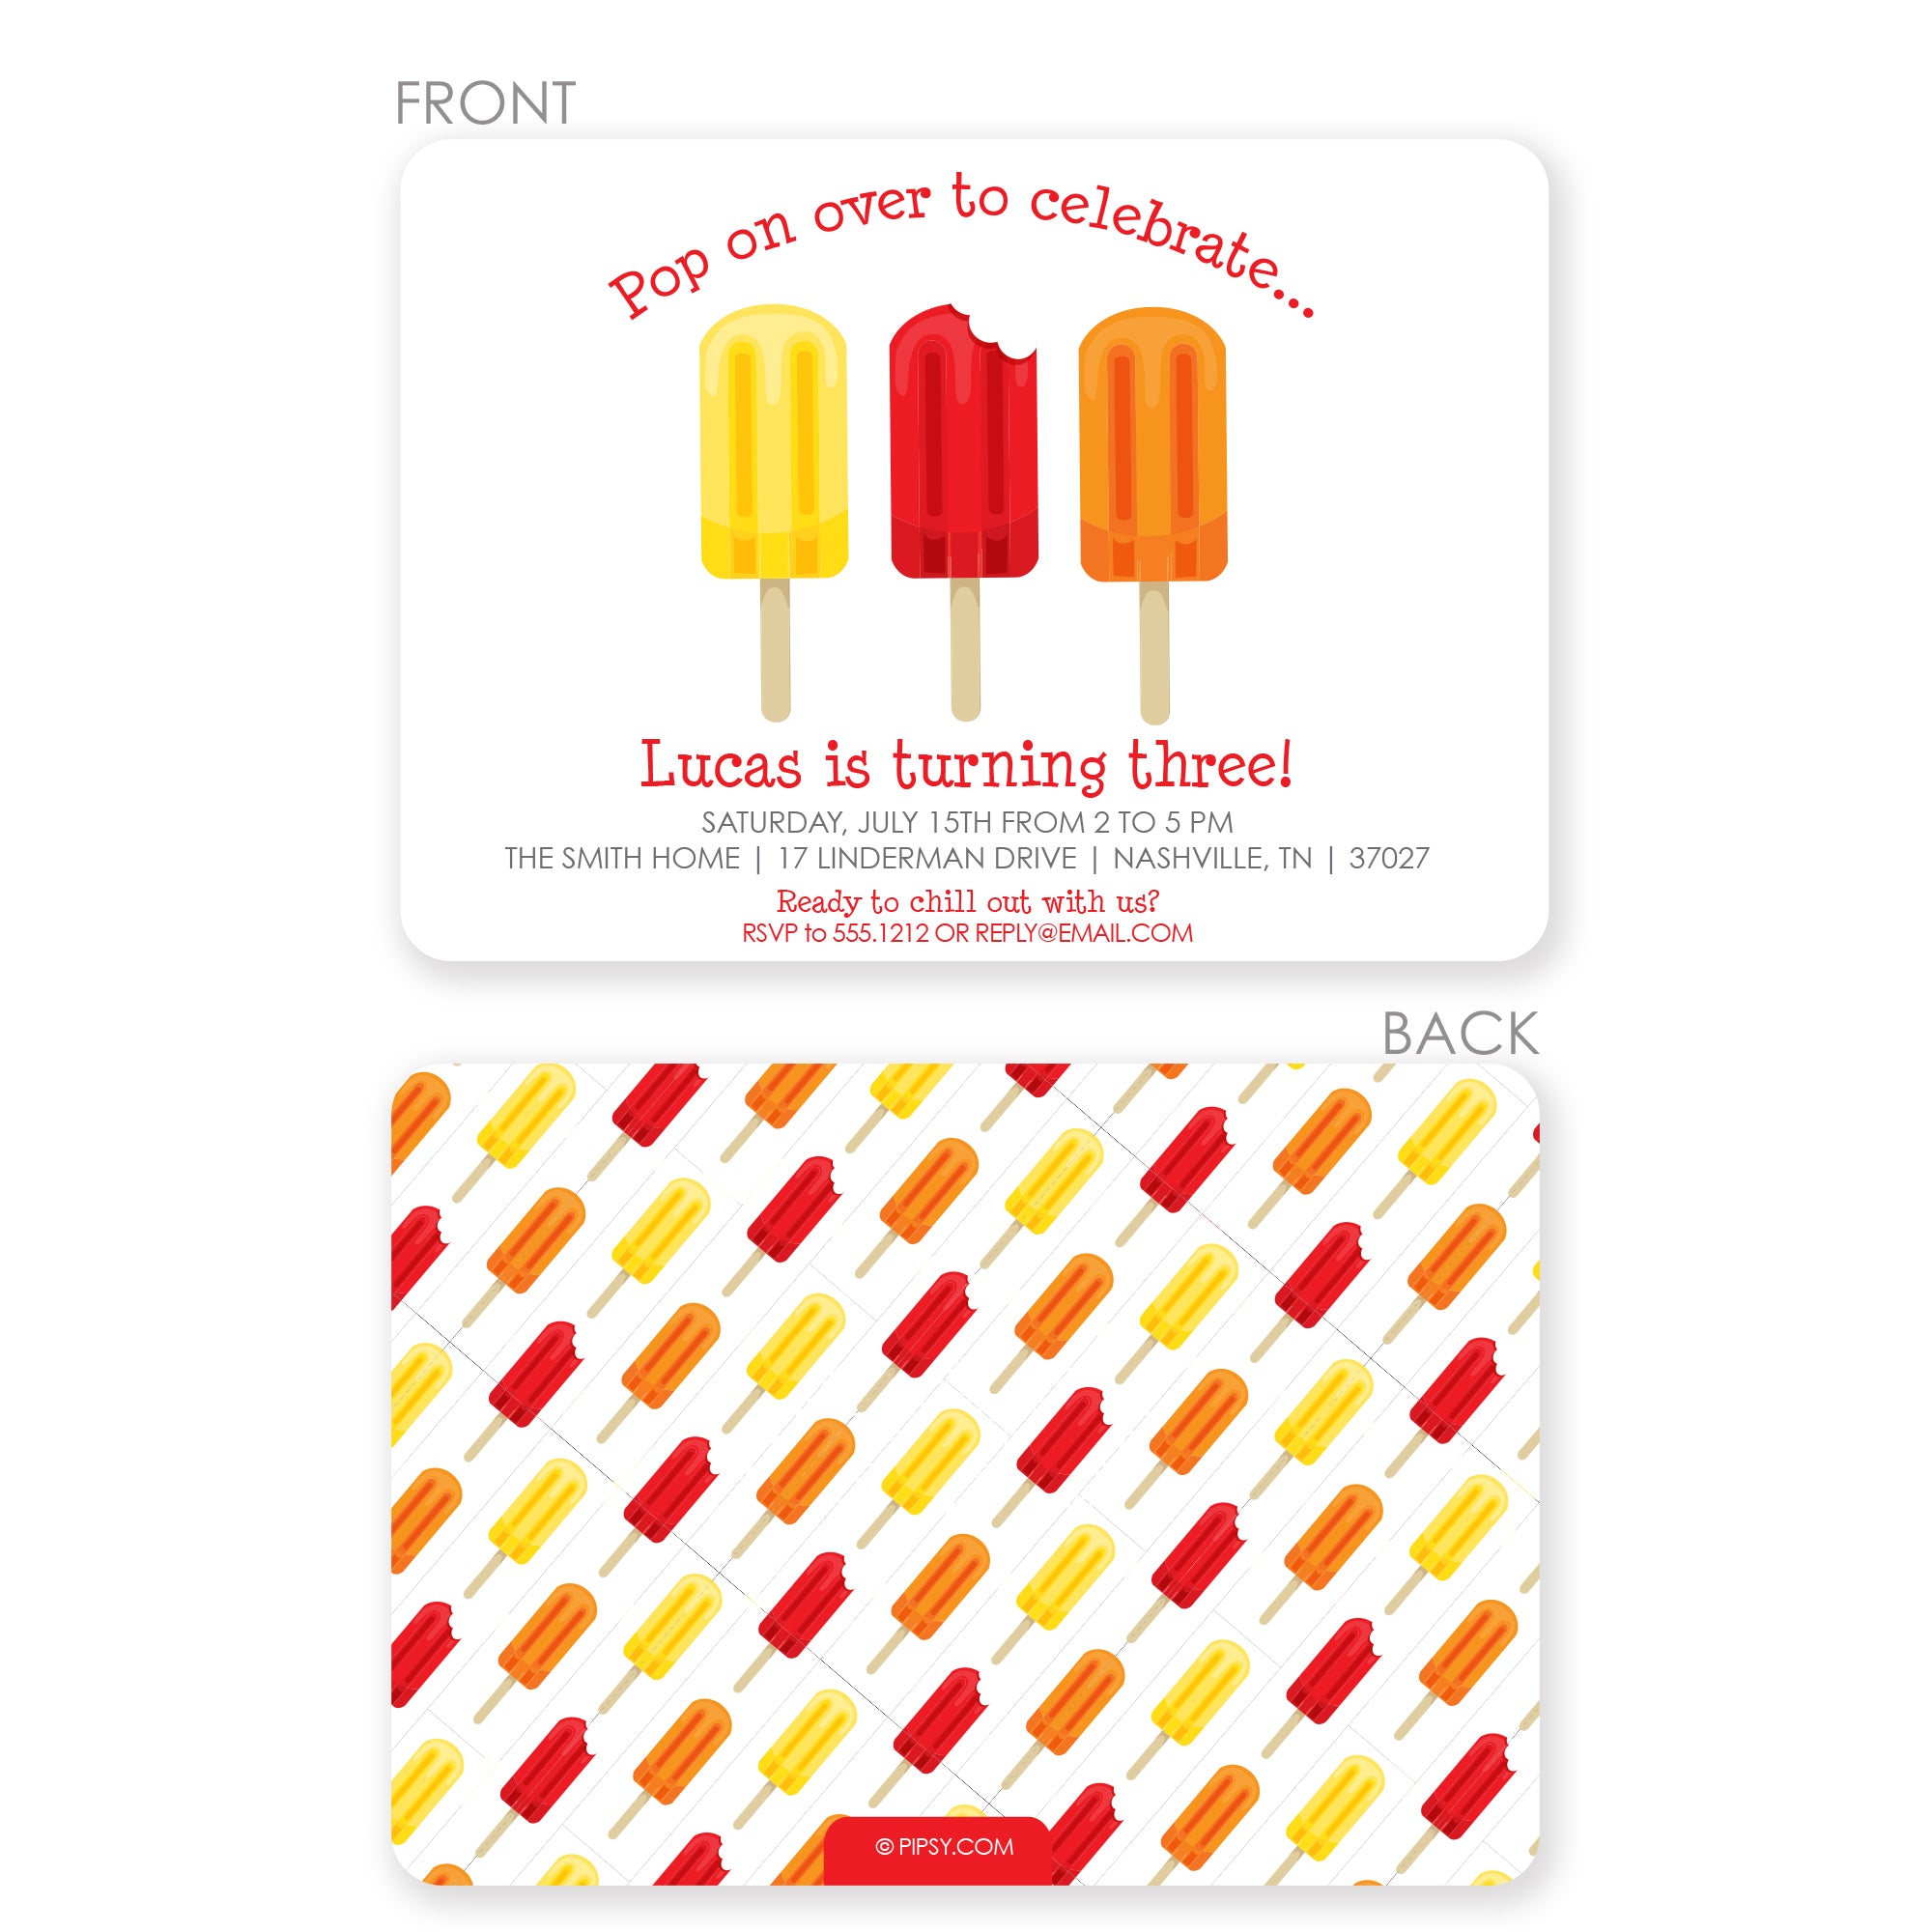 Popsicle birthday party invitation, printed on thick cardstock with a bright two-sided design